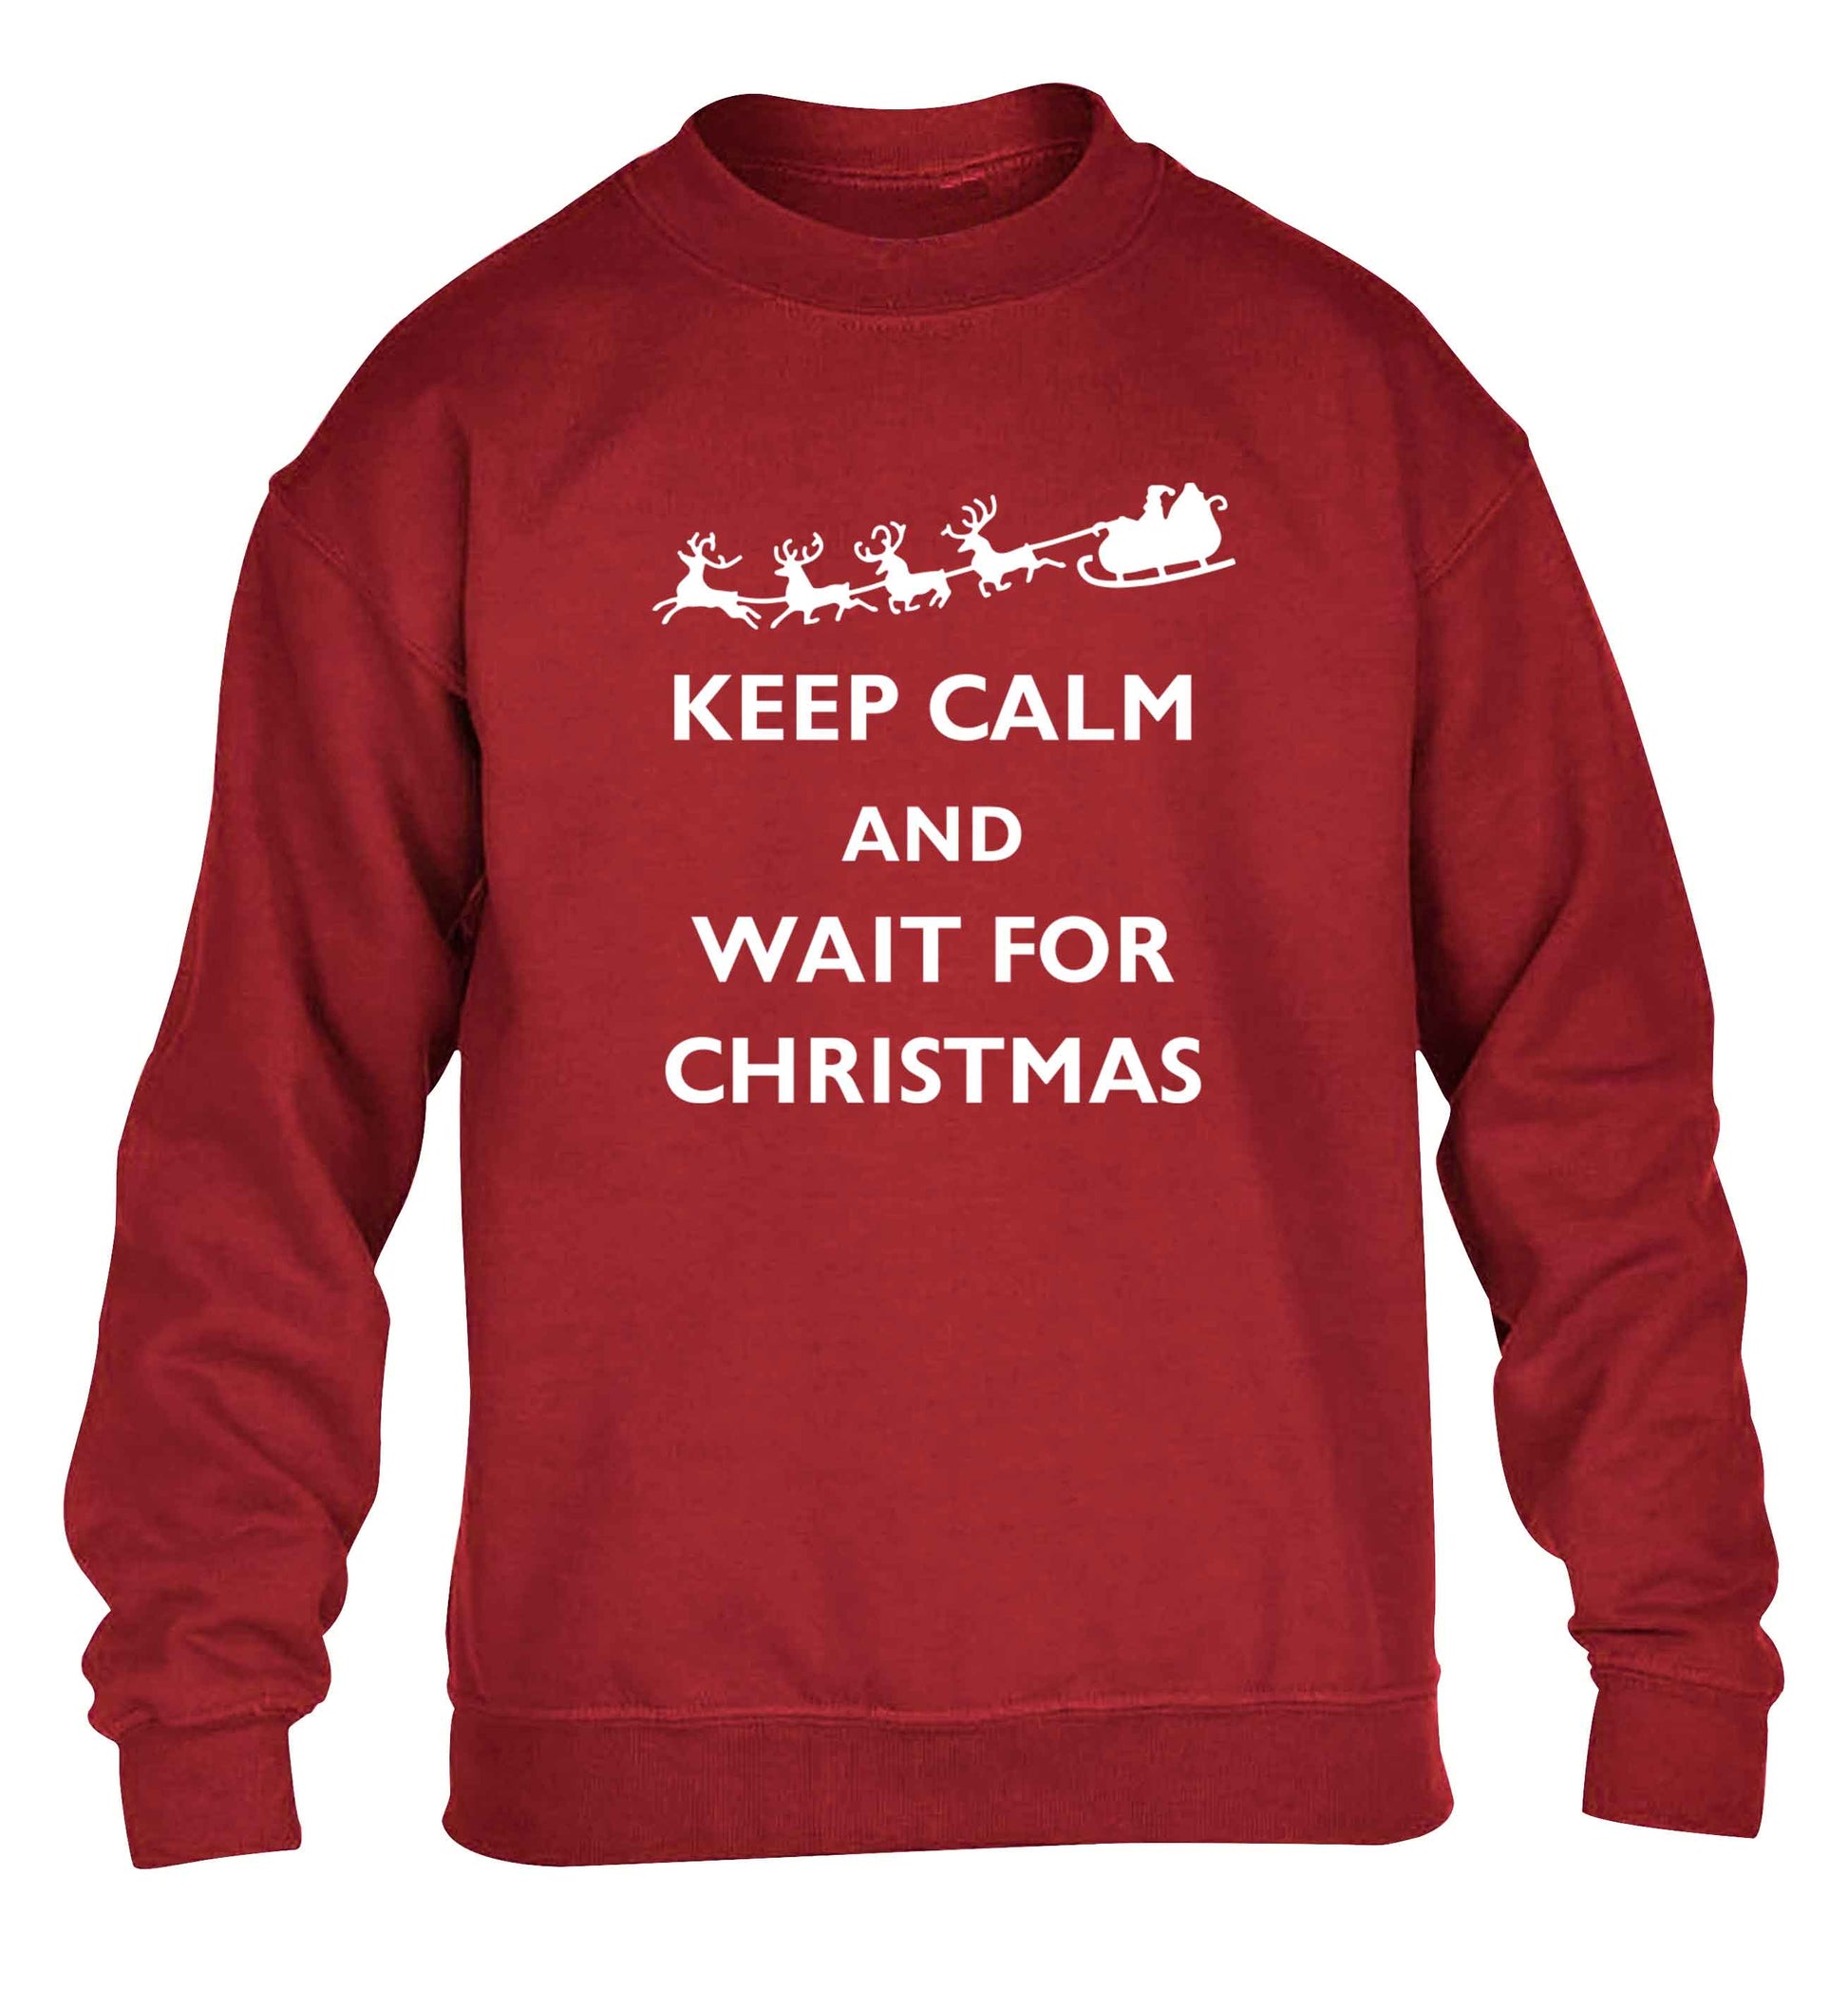 Keep calm and wait for Christmas children's grey sweater 12-13 Years